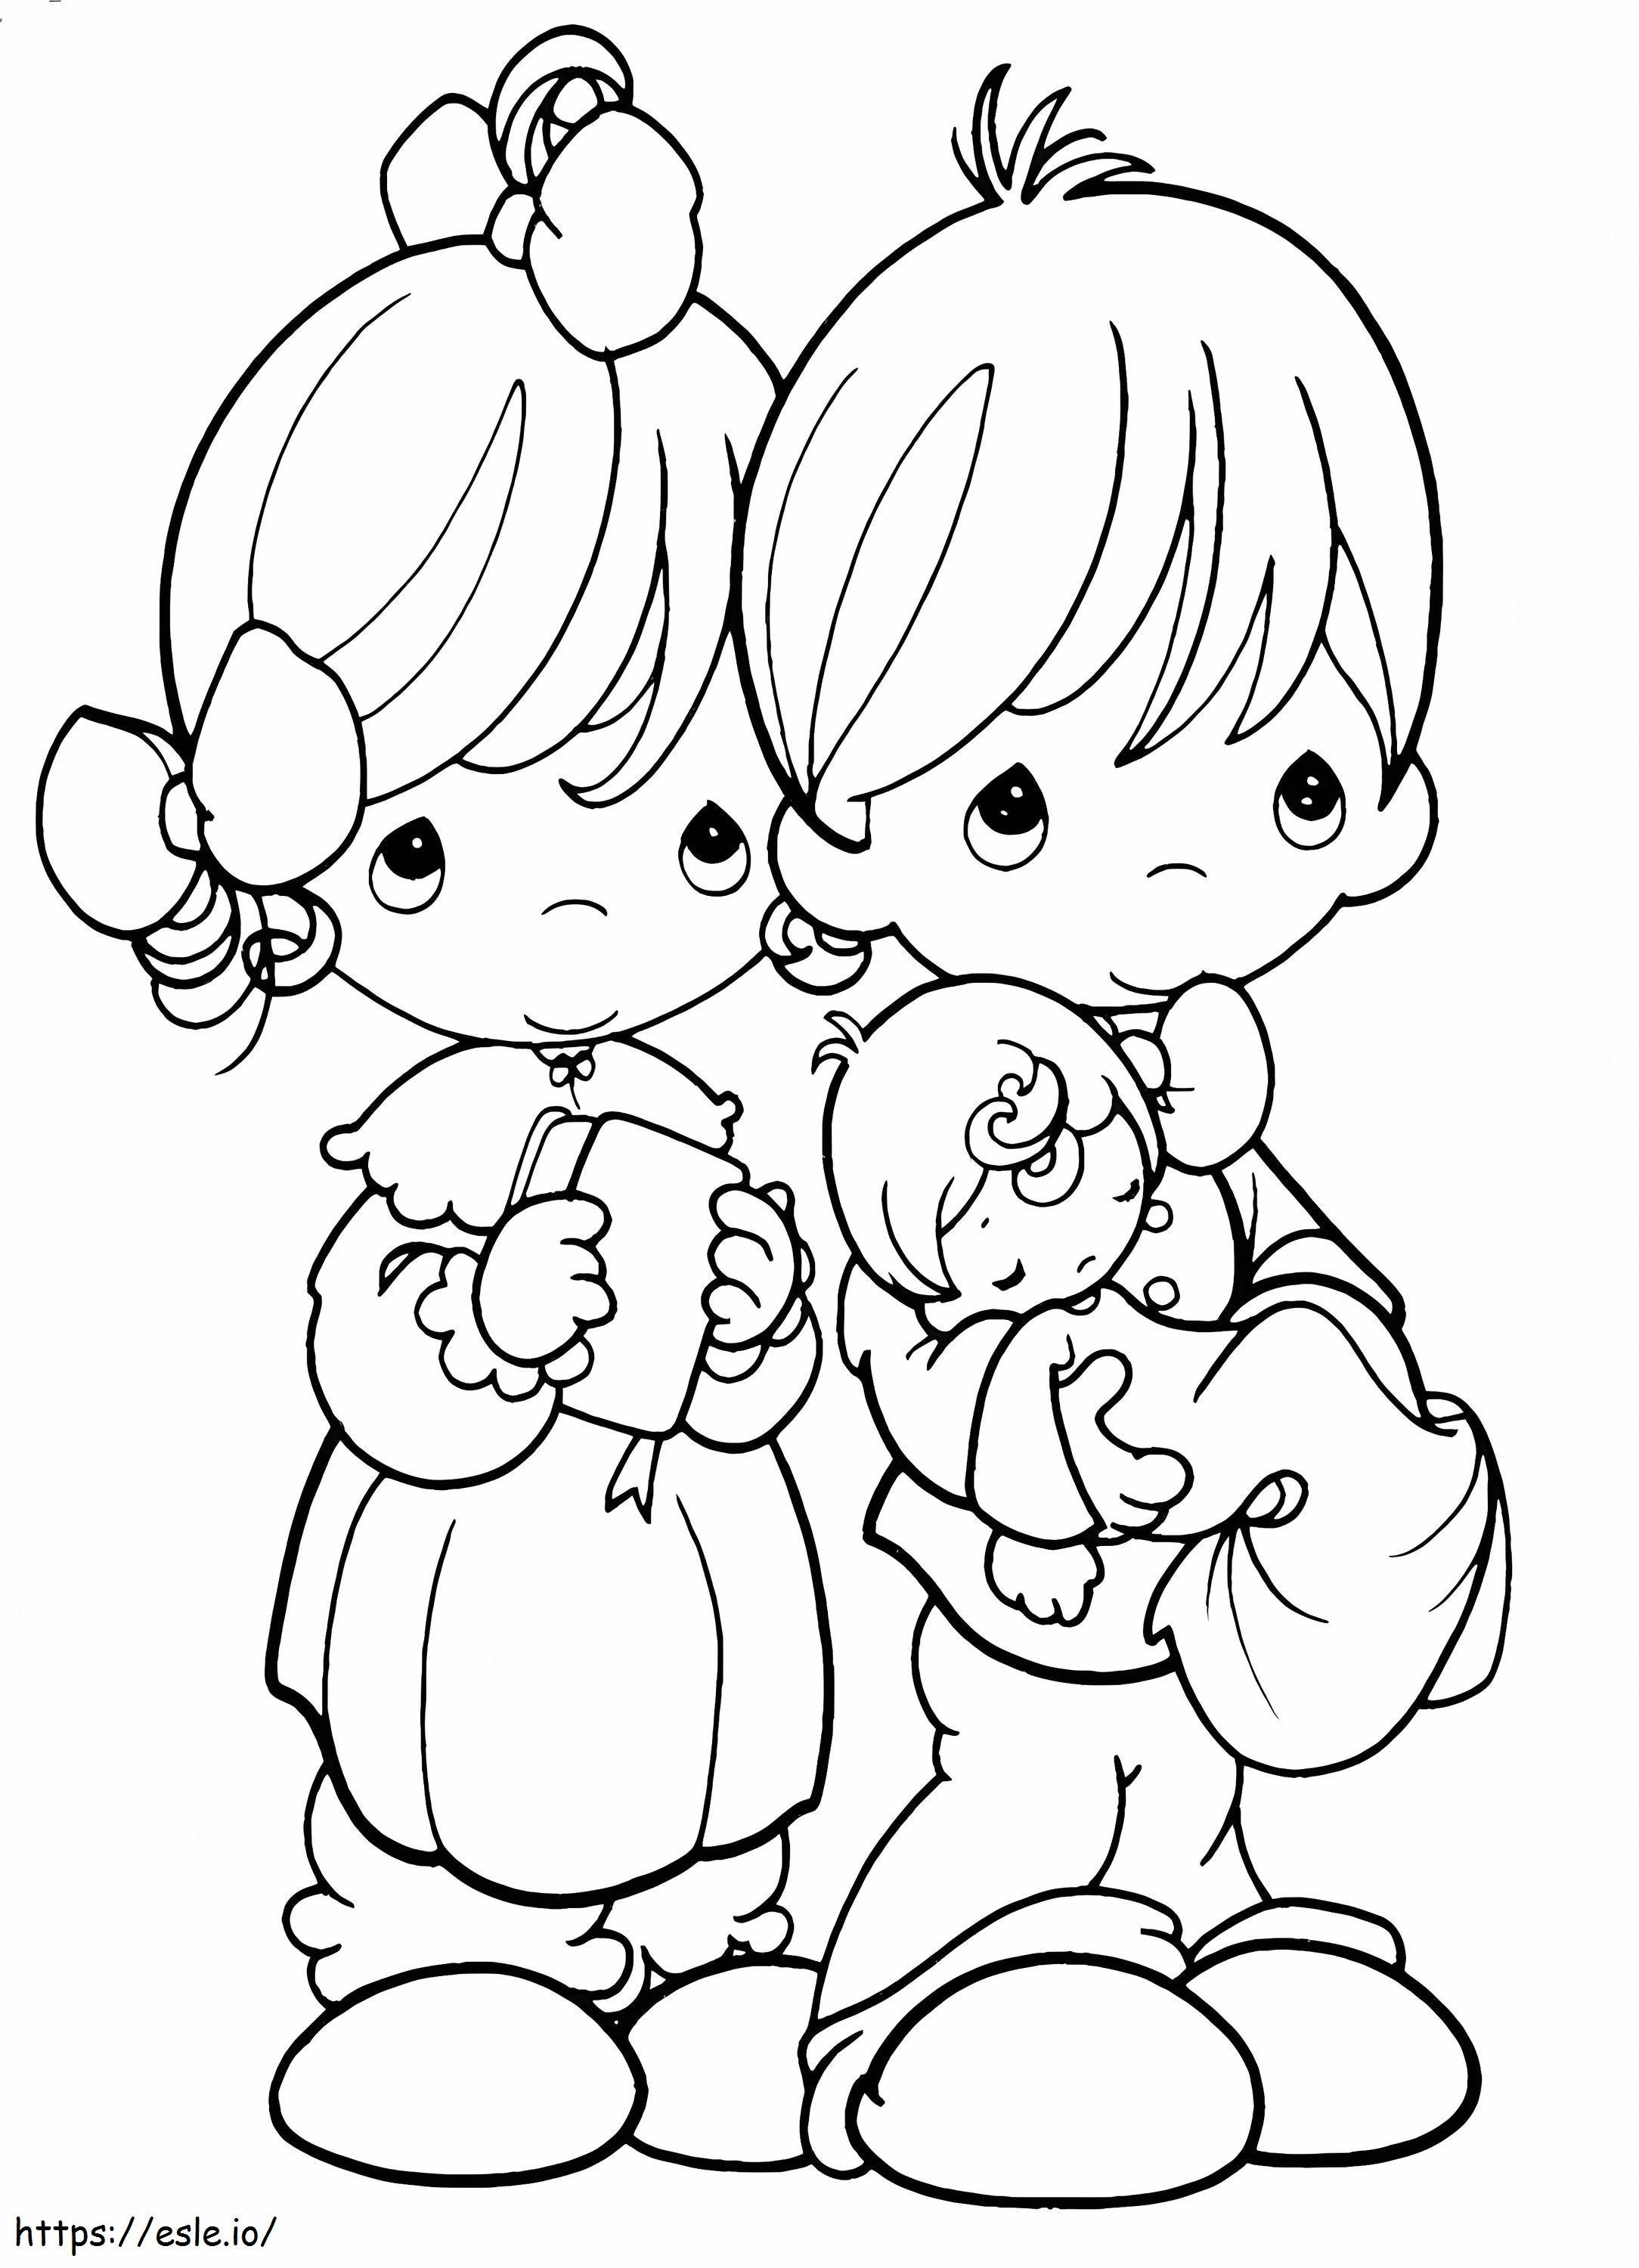 Family Printable Precious Moments Holy Pictu coloring page